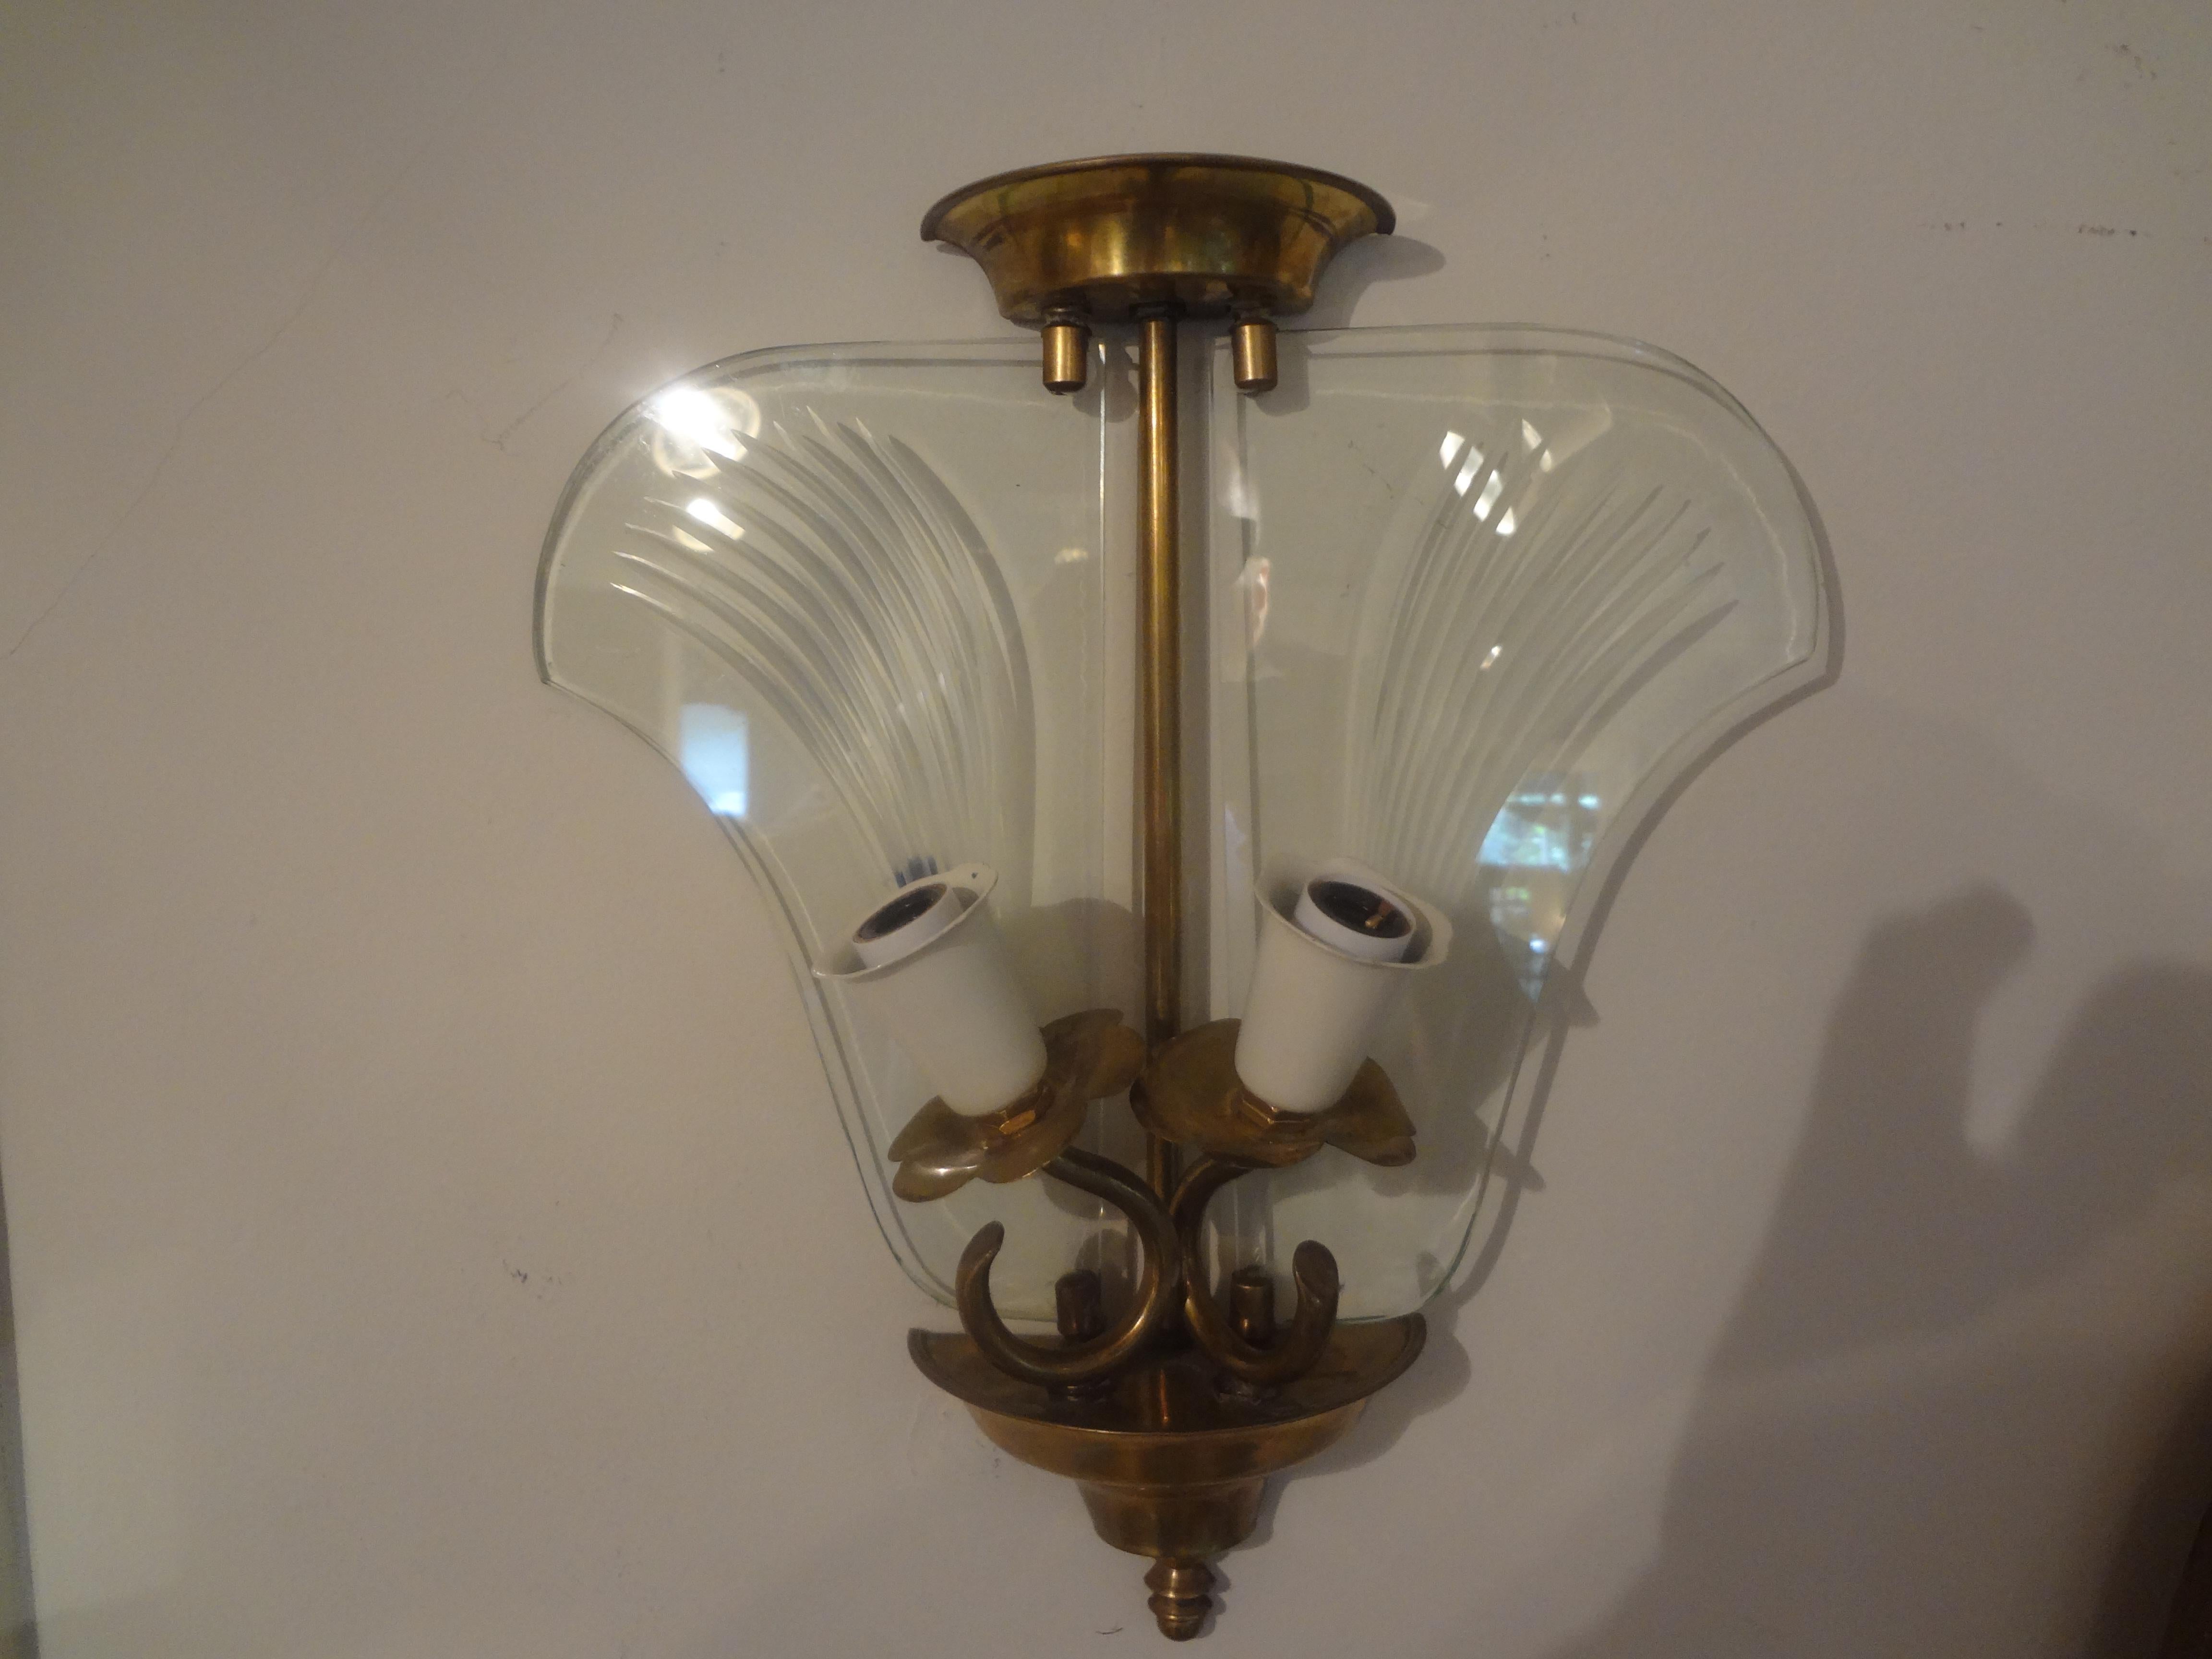 Pair of Italian Fontana Arte style brass and etched glass sconces.
Pair of Italian Mid-Century Modern brass and etched glass sconces. This interesting pair of Italian Gio Ponti / Fontana Arte inspired sconces have been newly wired with great patina.